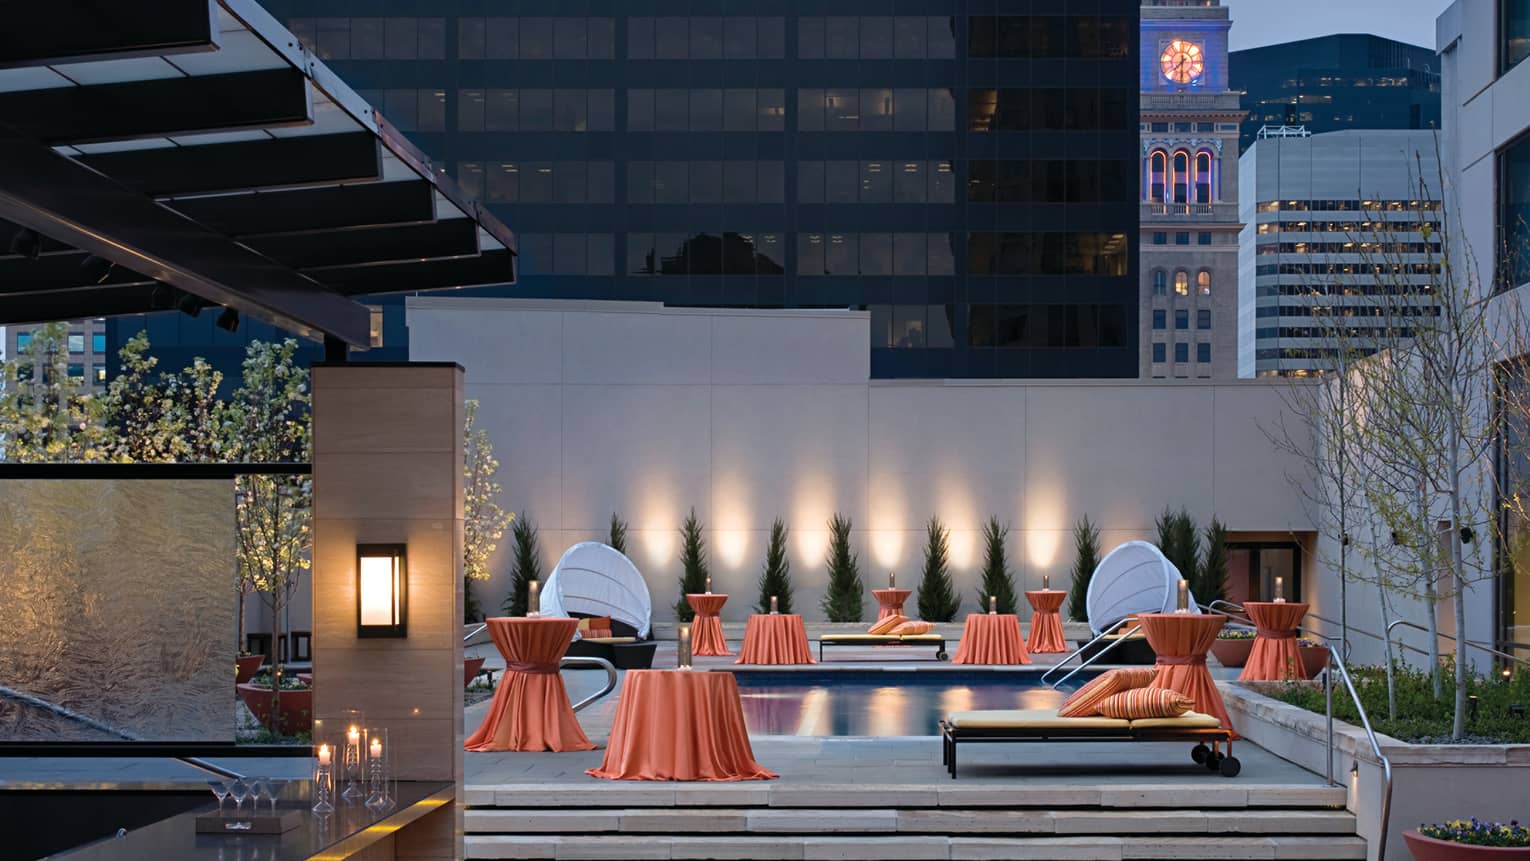 Rooftop bar, orange linens over small tables around outdoor pool